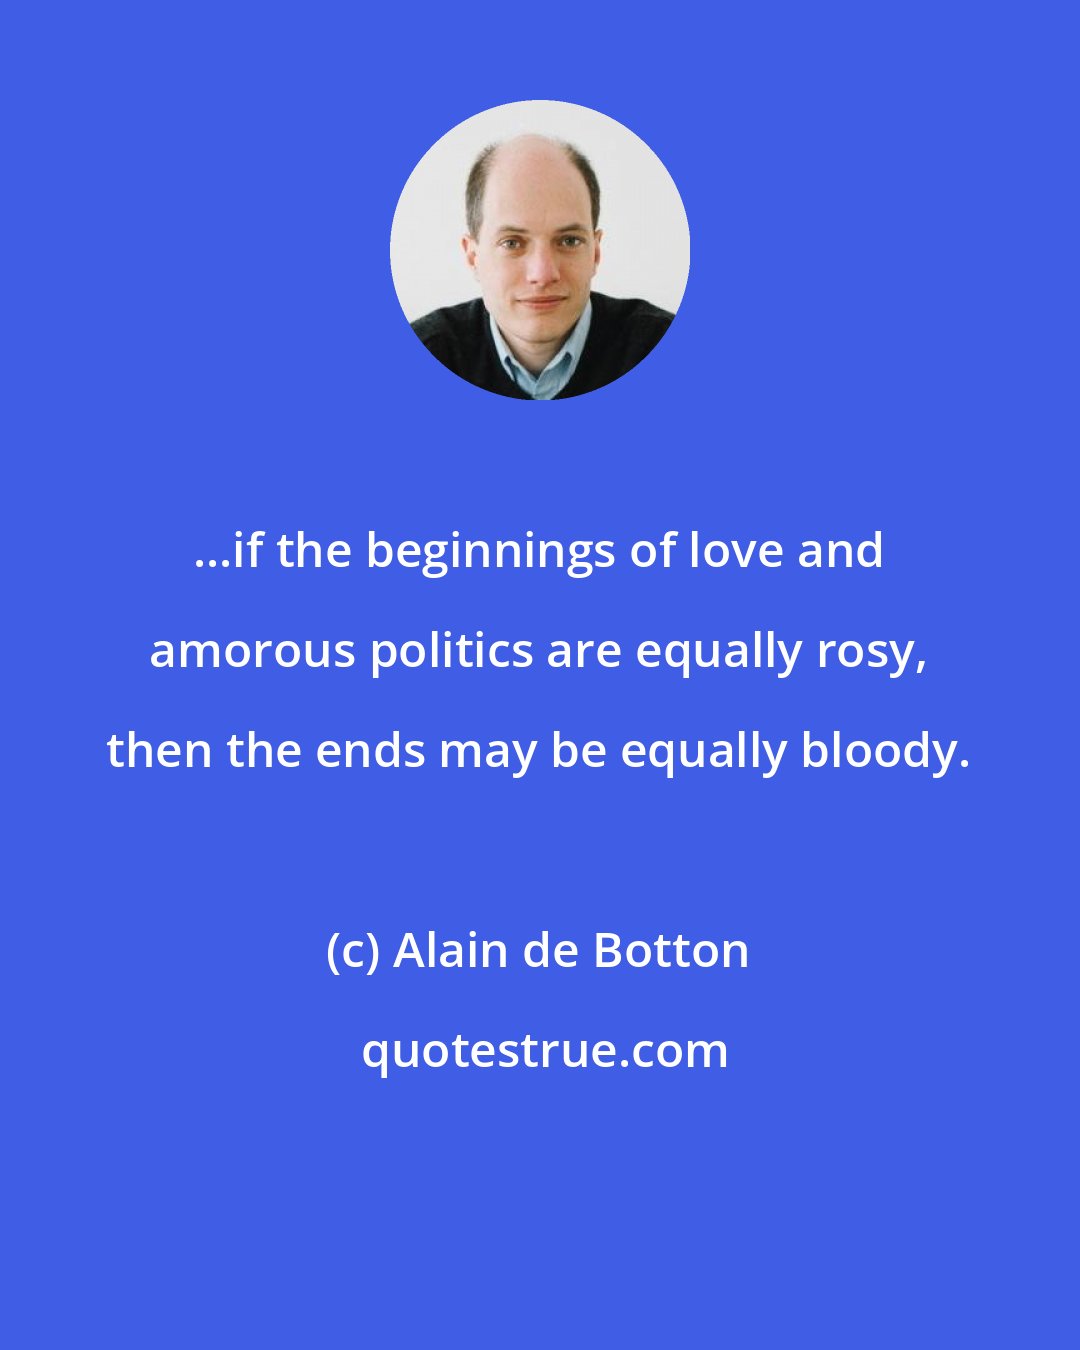 Alain de Botton: ...if the beginnings of love and amorous politics are equally rosy, then the ends may be equally bloody.